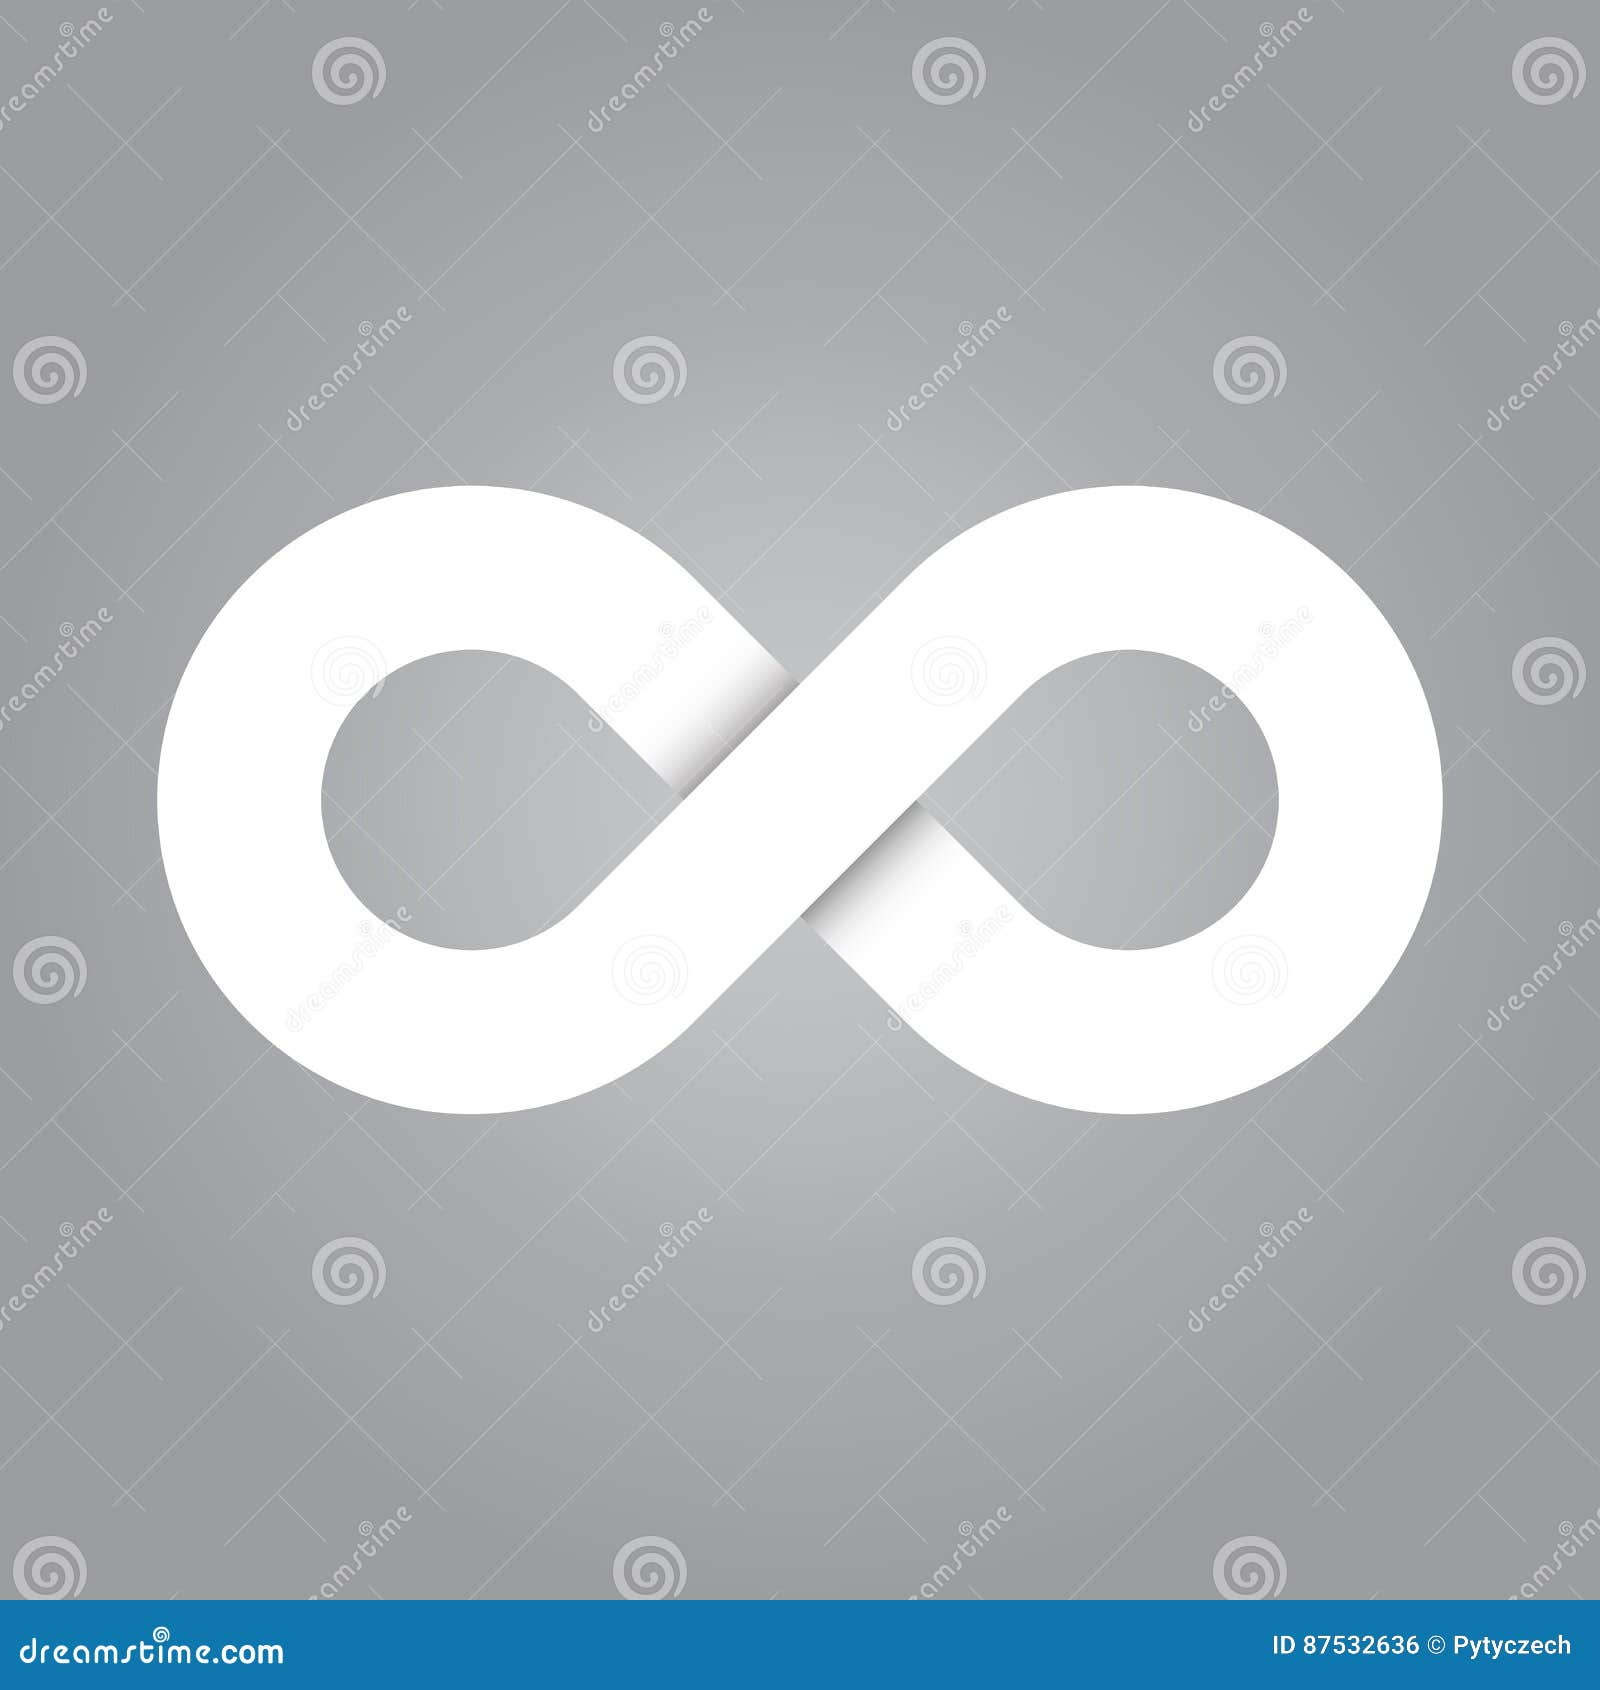 Infinity simple black icon on white background Vector Image